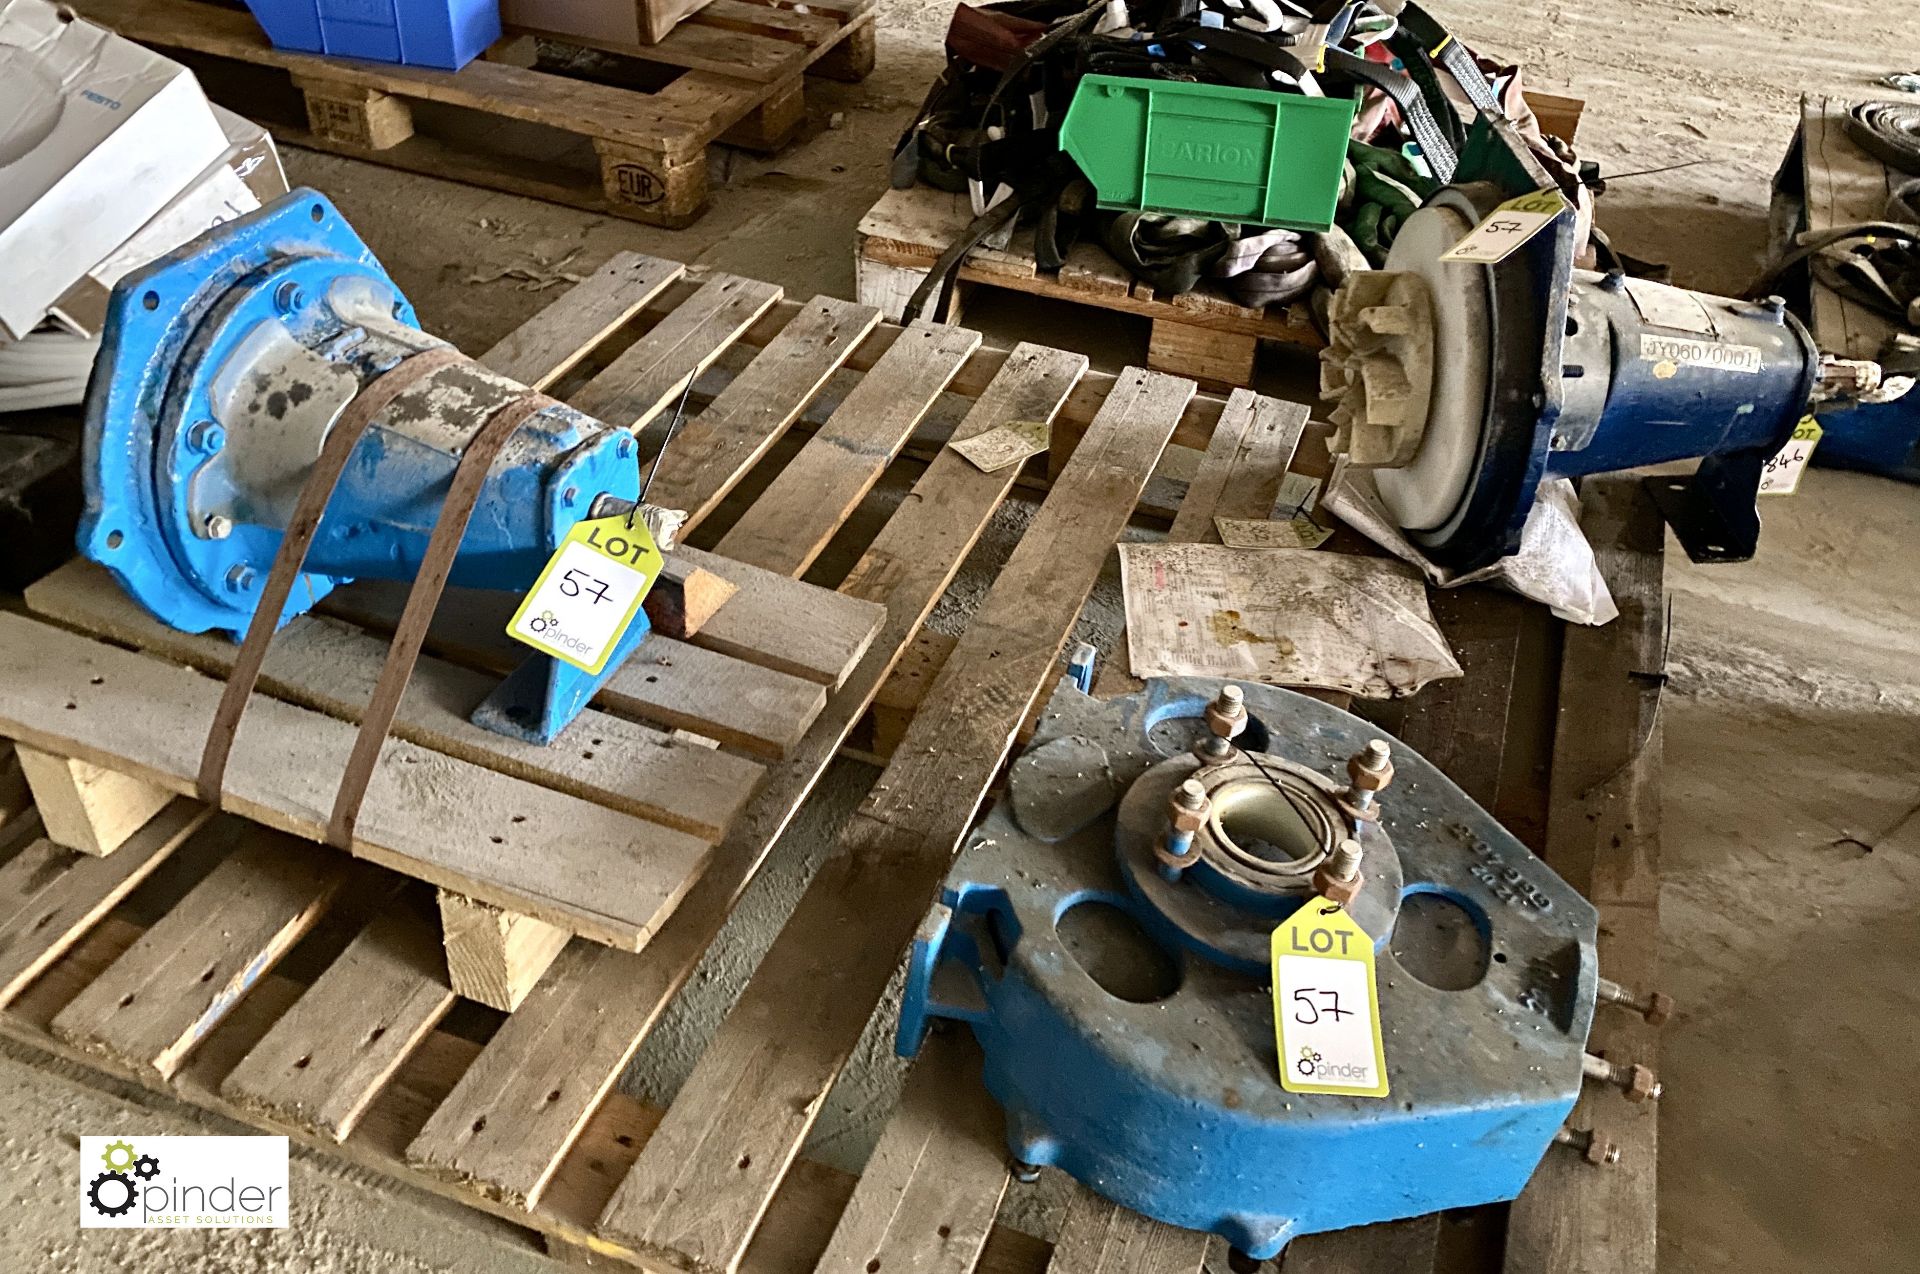 2 Pumps including Wernert NEPO 125-80-200 centrifugal pump and Durco pump and Wernert Volute Casing,